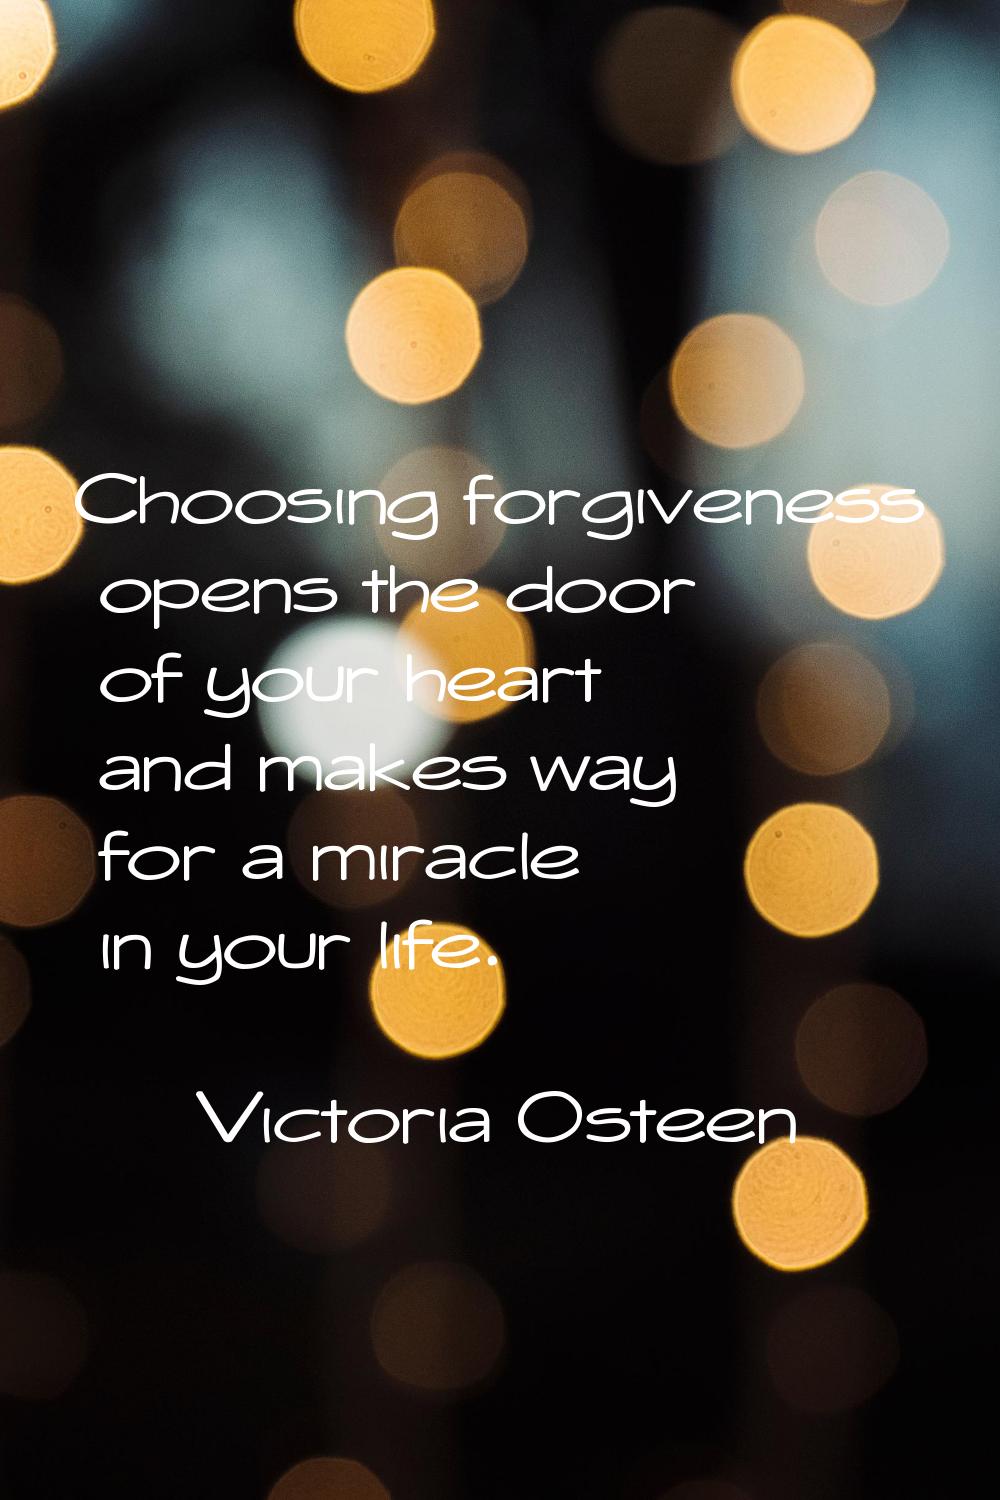 Choosing forgiveness opens the door of your heart and makes way for a miracle in your life.